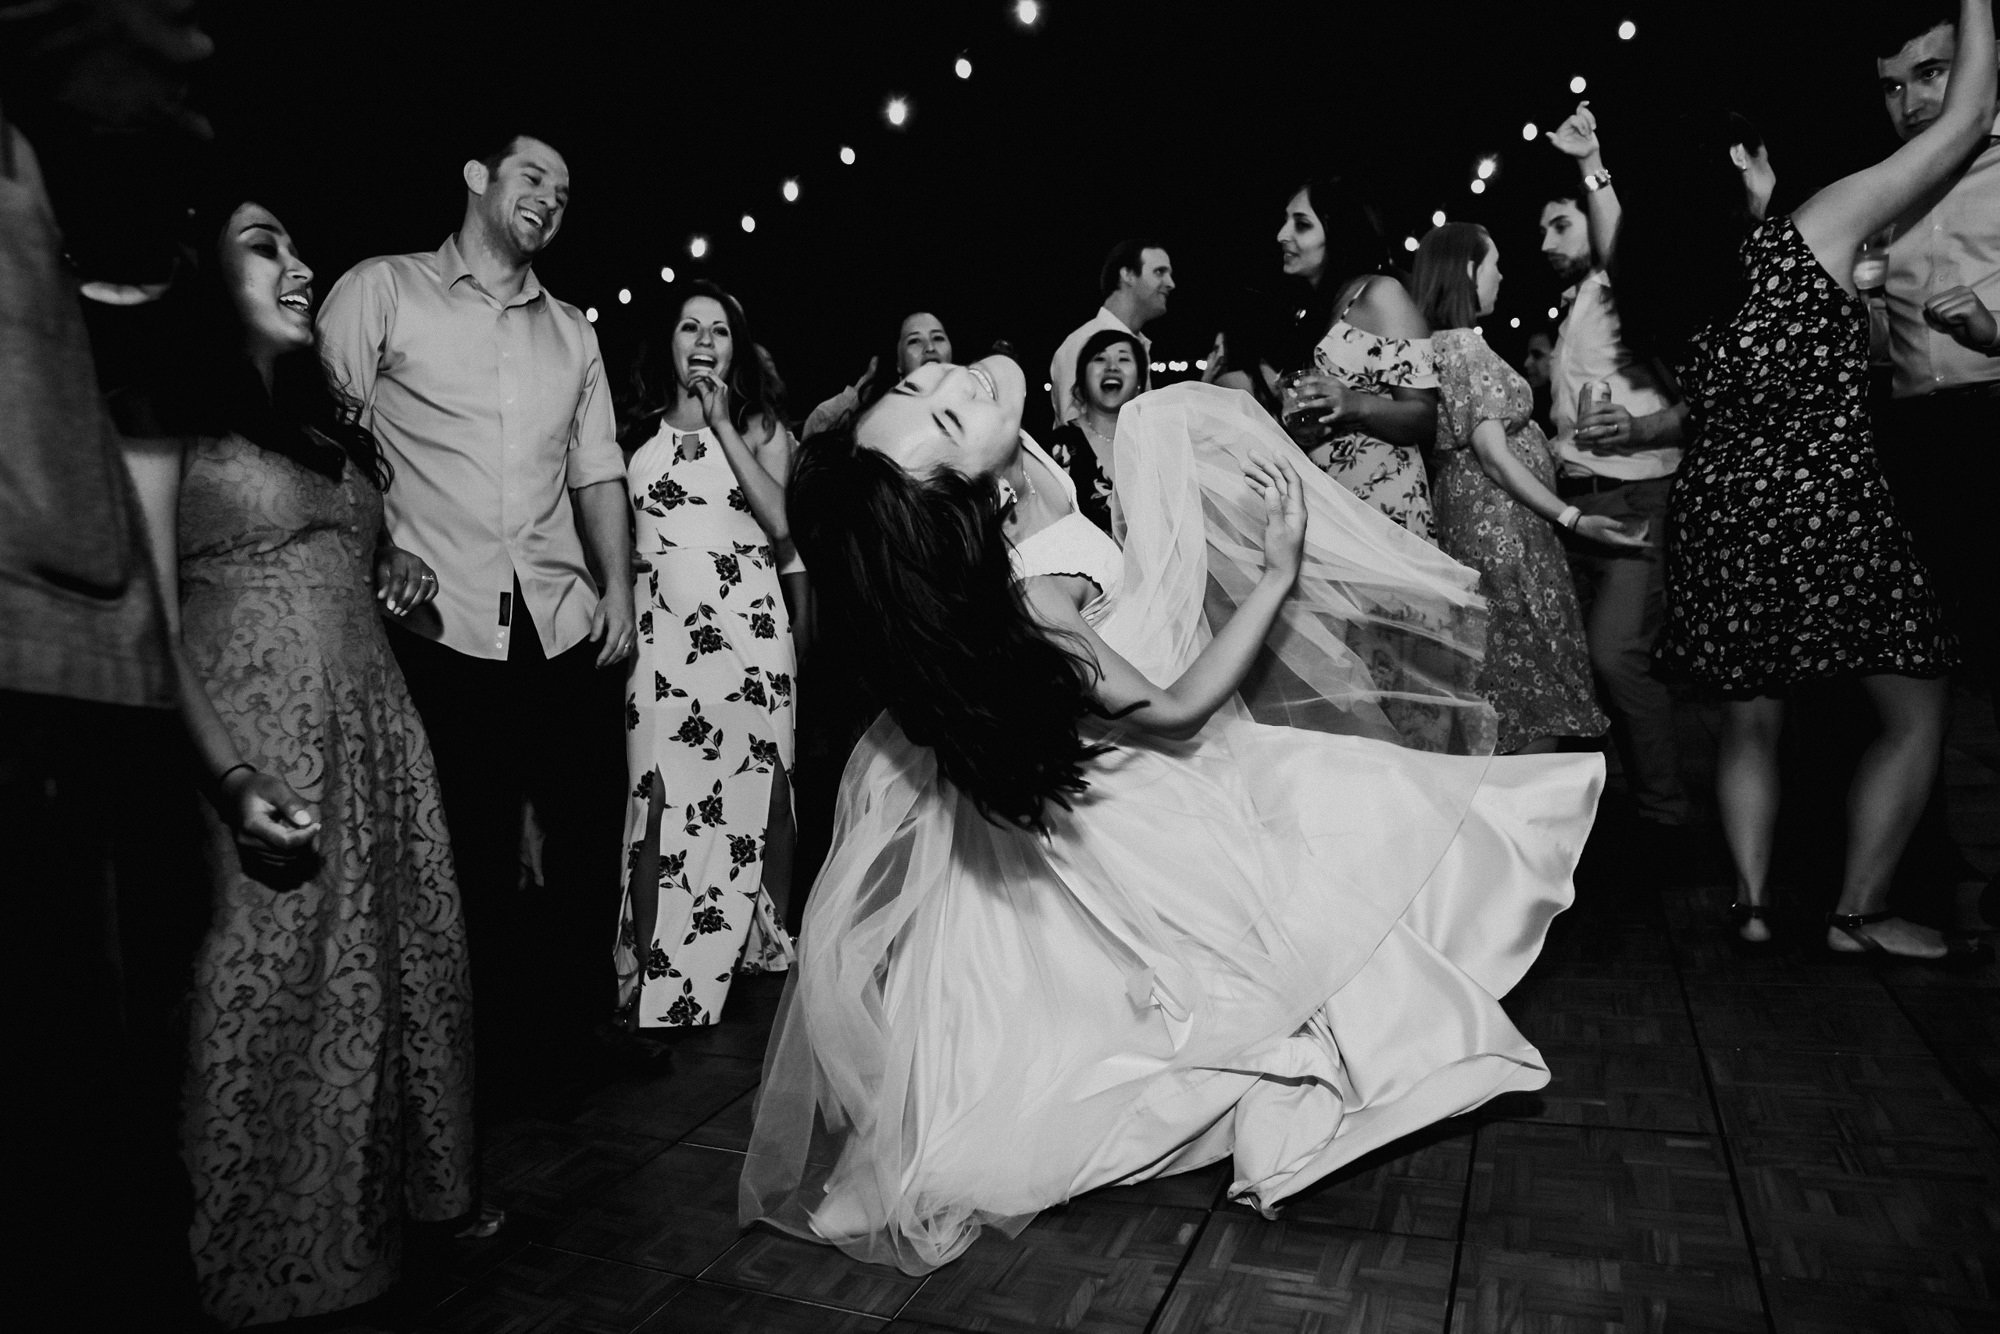 Saguaro Lake Guest Ranch The Perfect Location for a Laid-Back Fun-Filled Wedding. The best documentary wedding photographer Mantas Kubilinskas-75.jpg